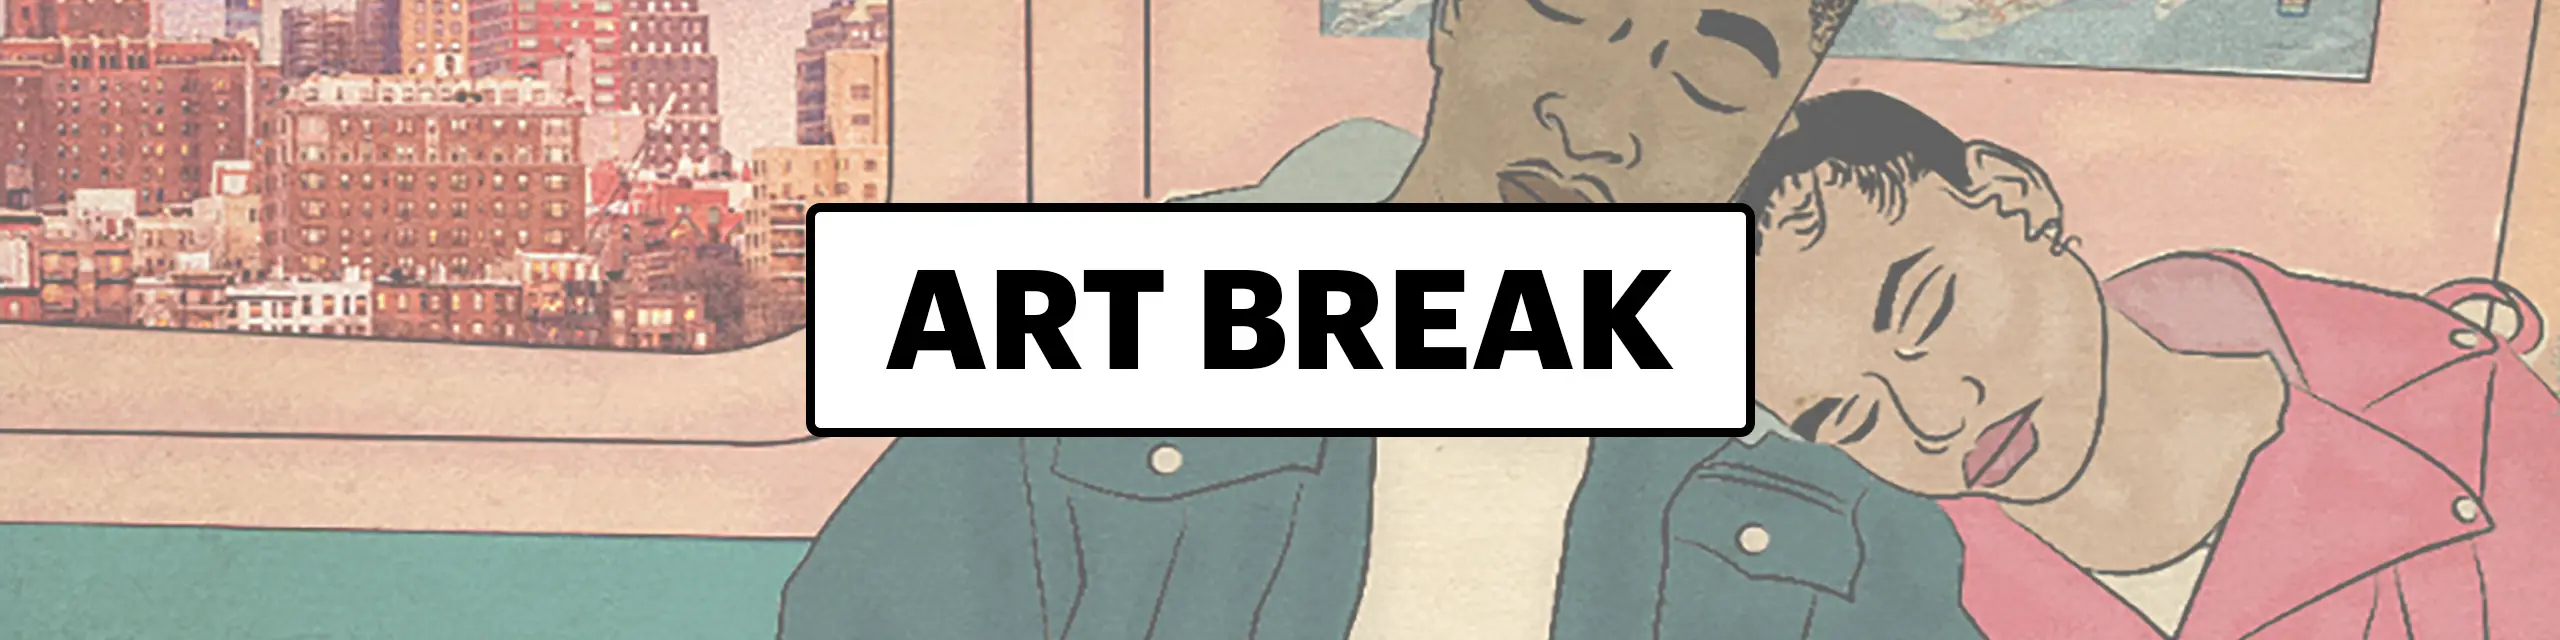 Words: ART BREAK, over top of illustration of man and woman cuddled on NYC subway